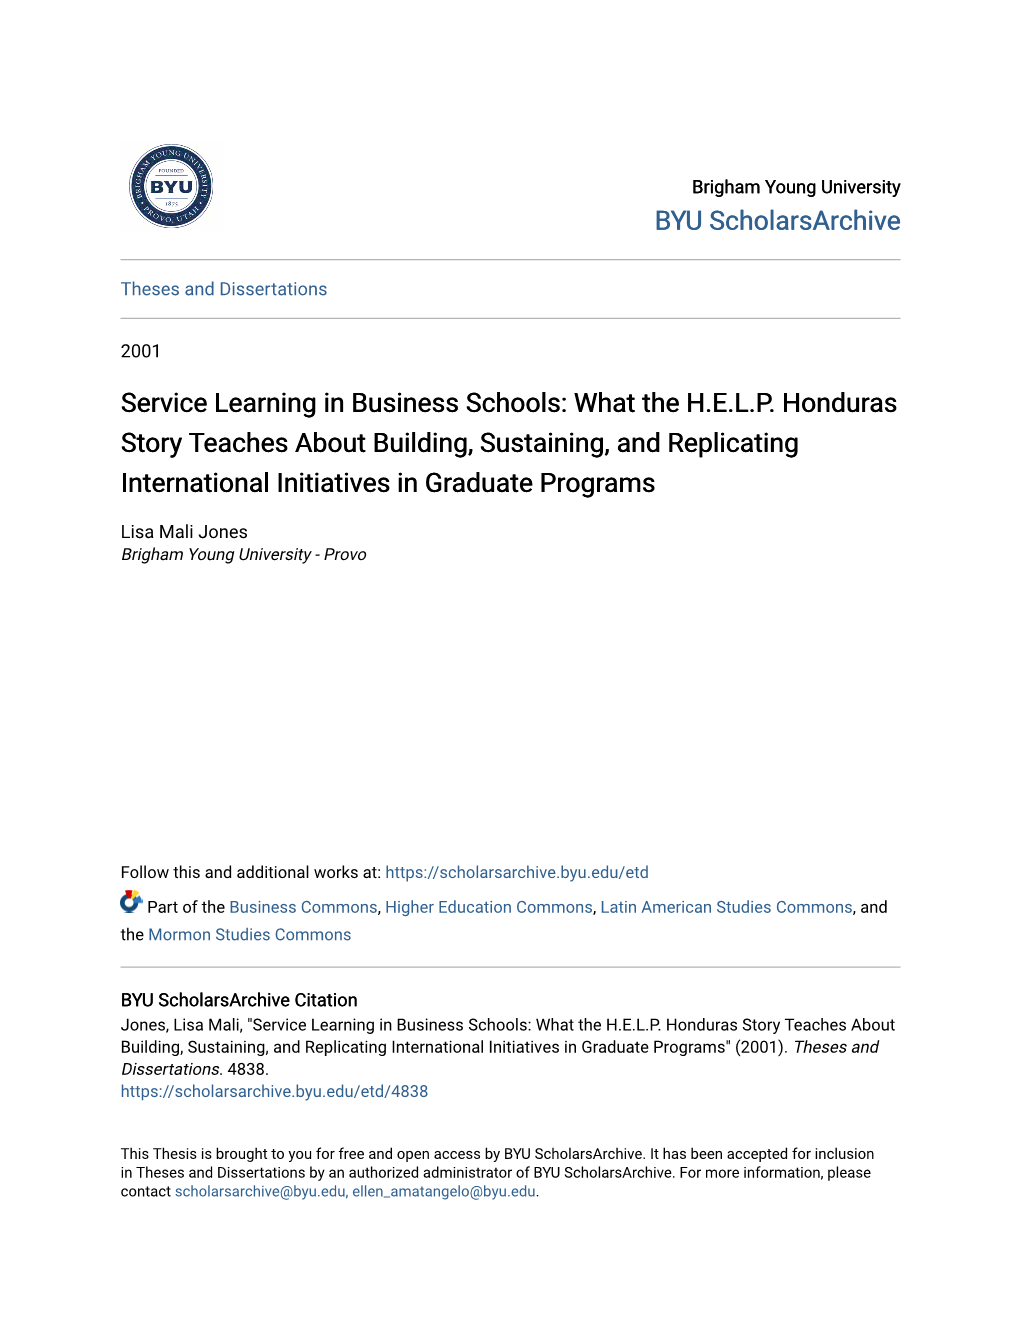 Service Learning in Business Schools: What the H.E.L.P